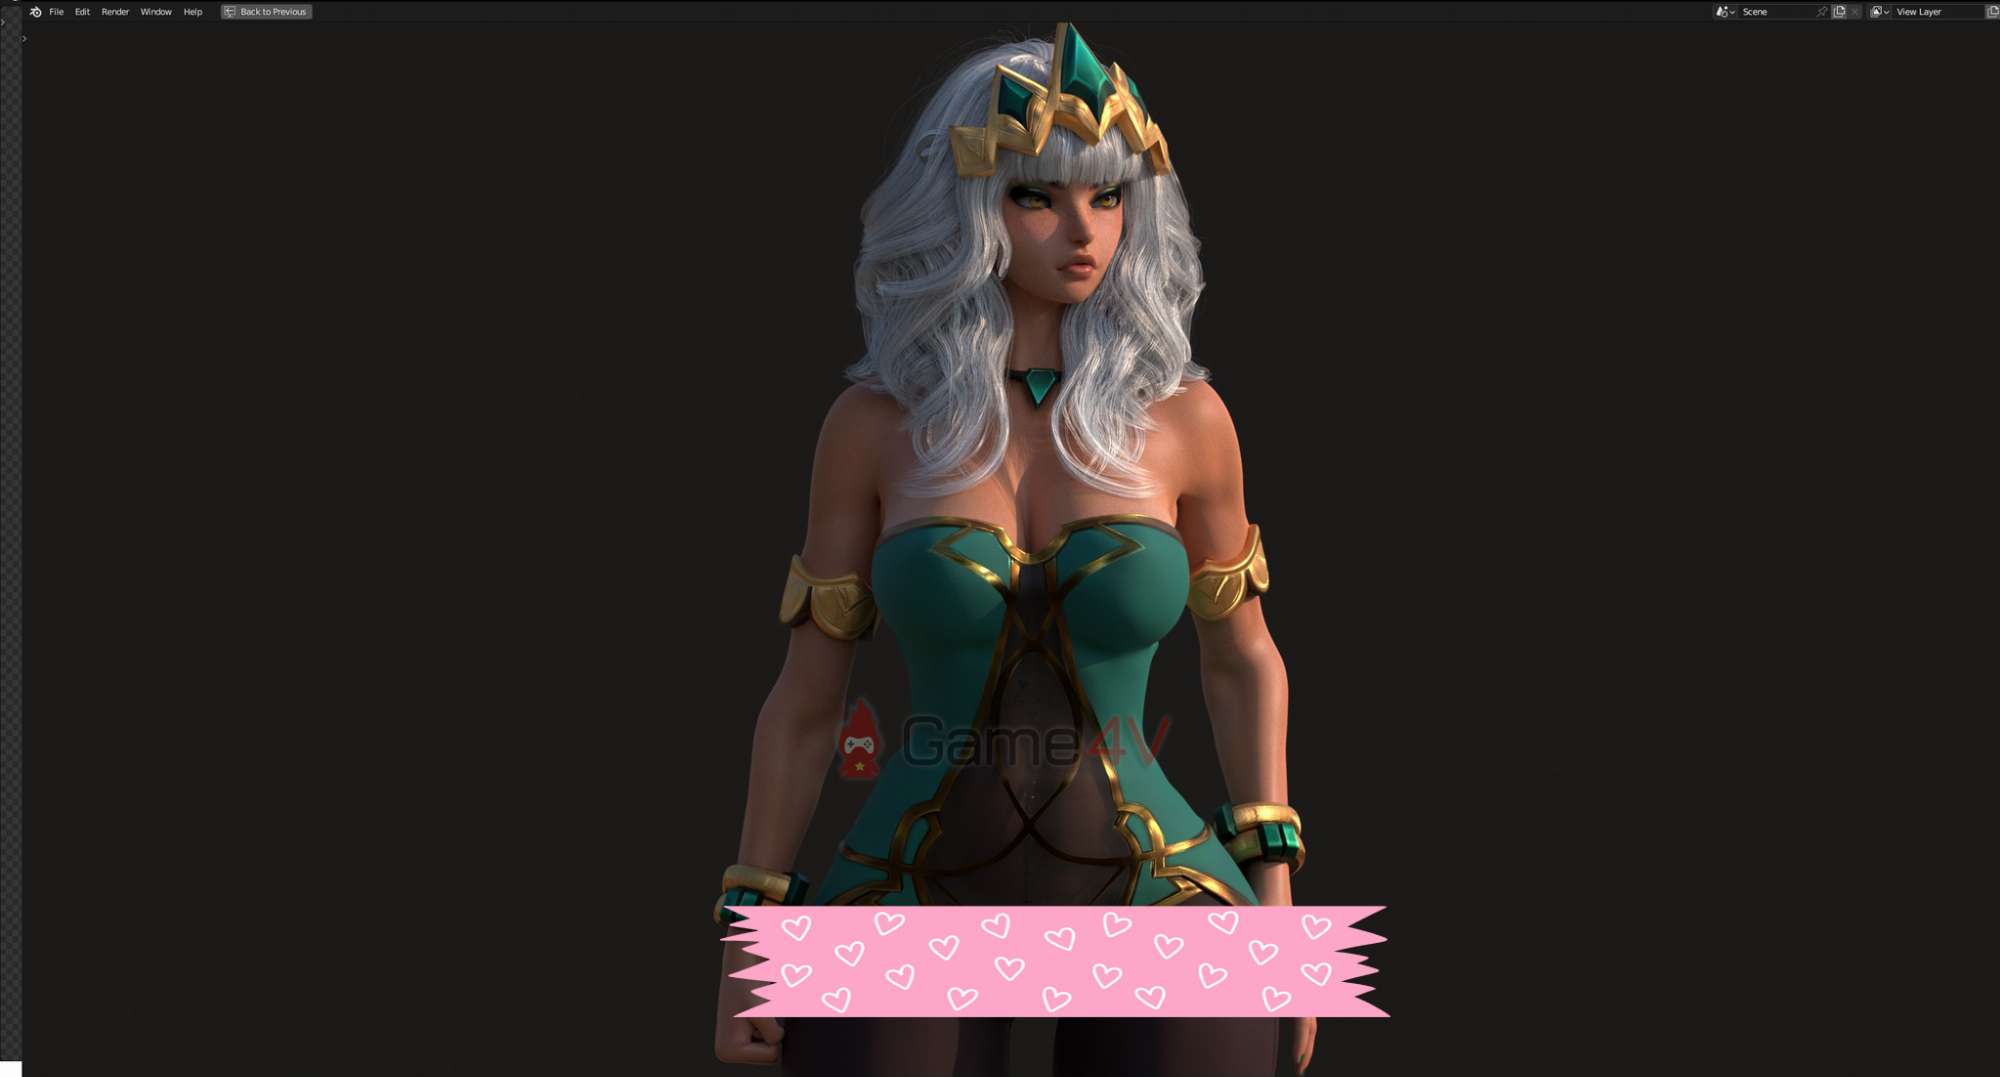 Currently, there are still quite a few gamers mentioning the 3D models of champions in League of Legends.